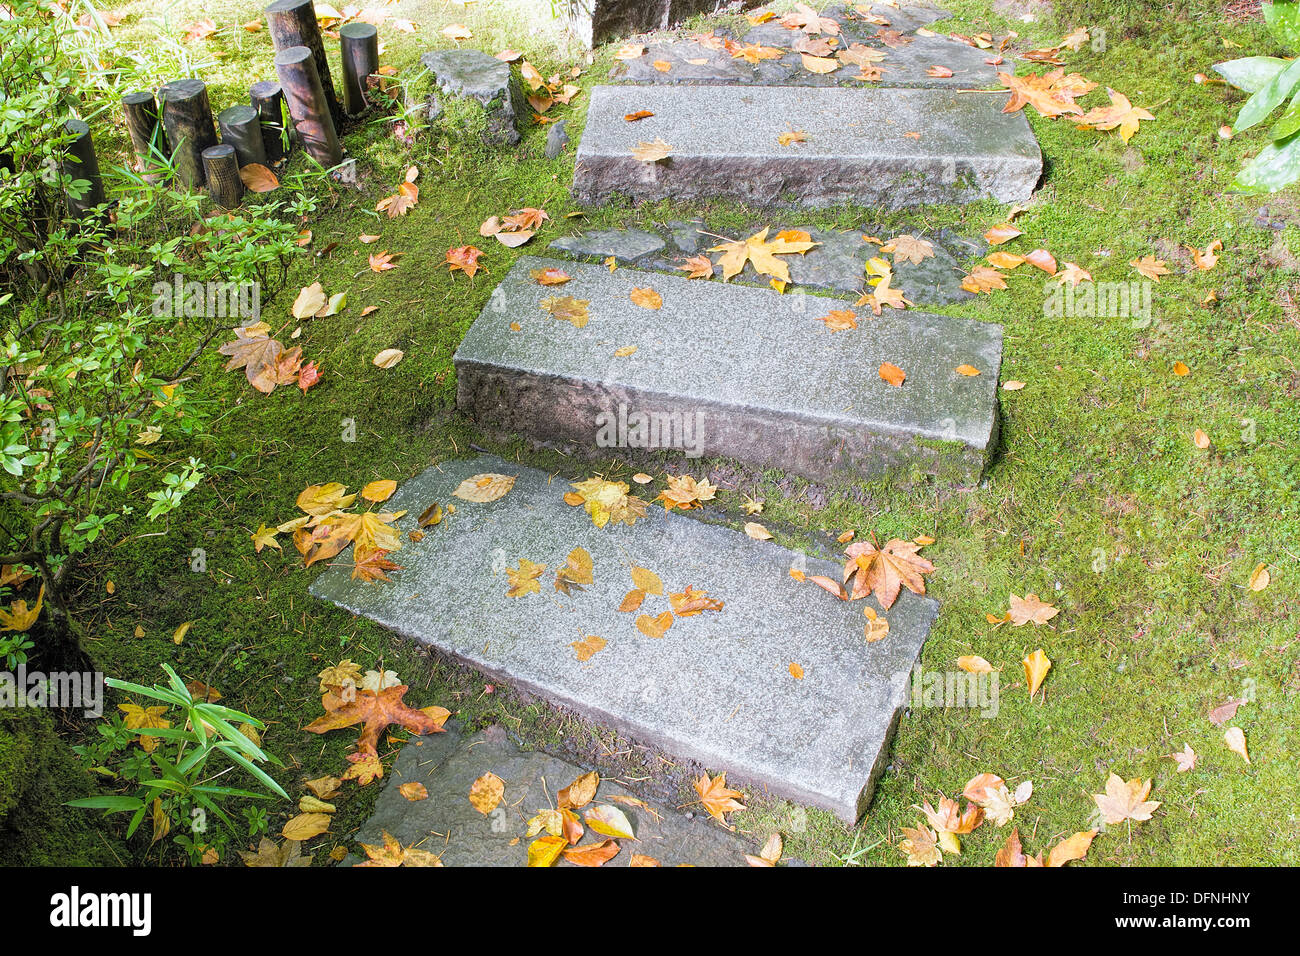 Asian Inspired Garden Granite Slabs Stone Steps with Moss and Fall Leaves Stock Photo